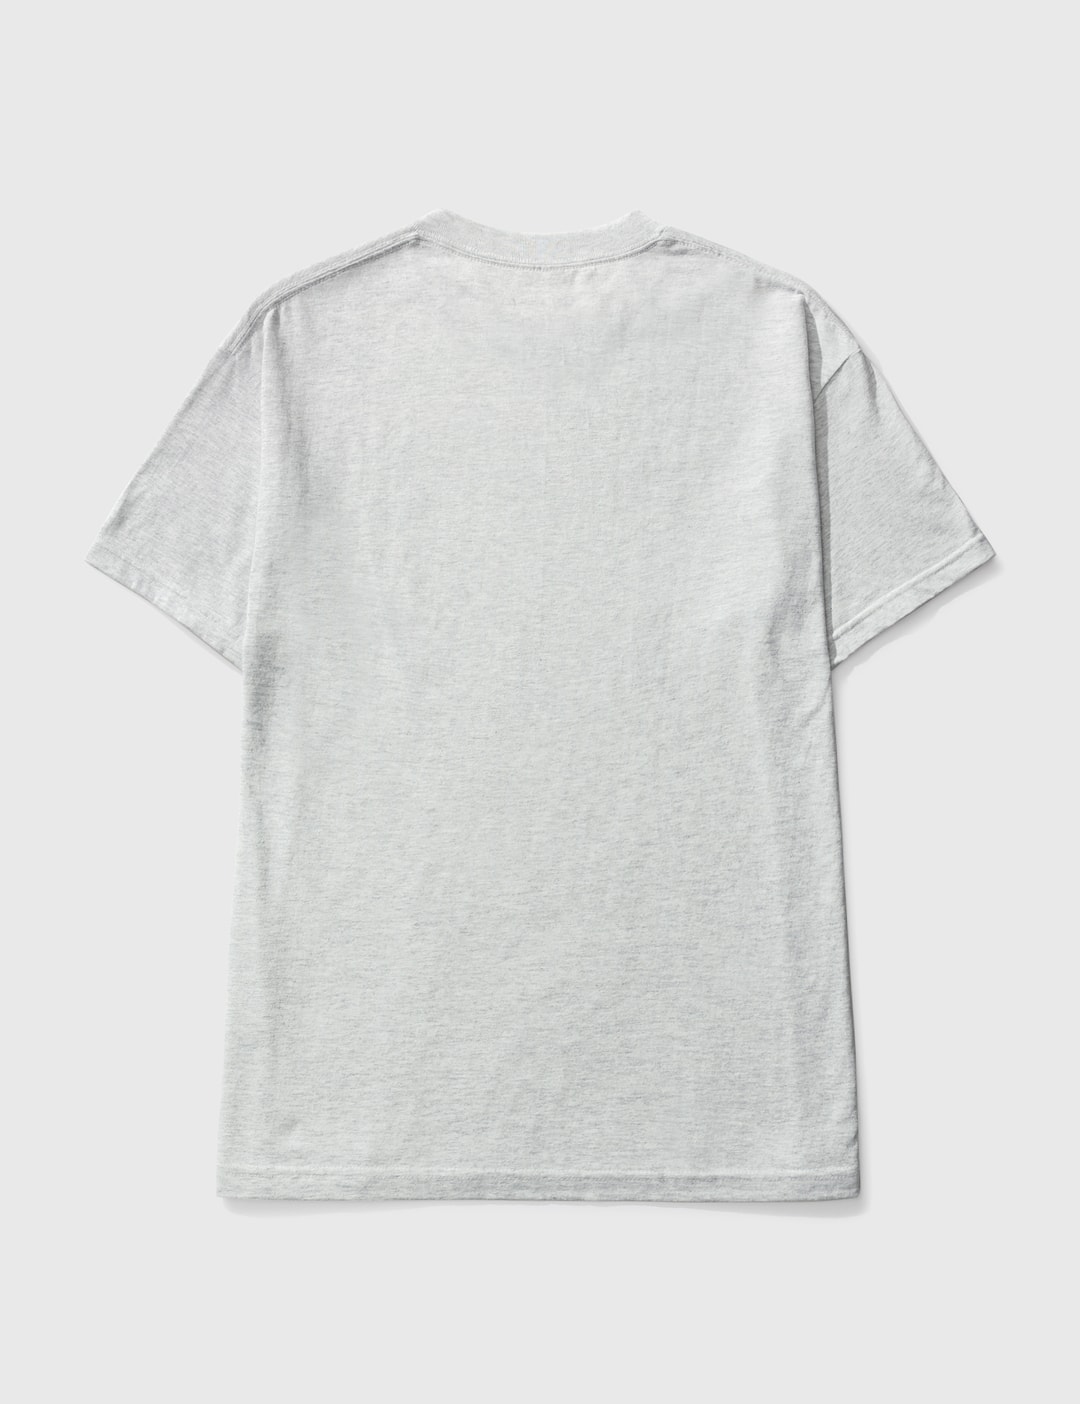 GX1000 - Stomp T-shirt | HBX - Globally Curated Fashion and Lifestyle ...